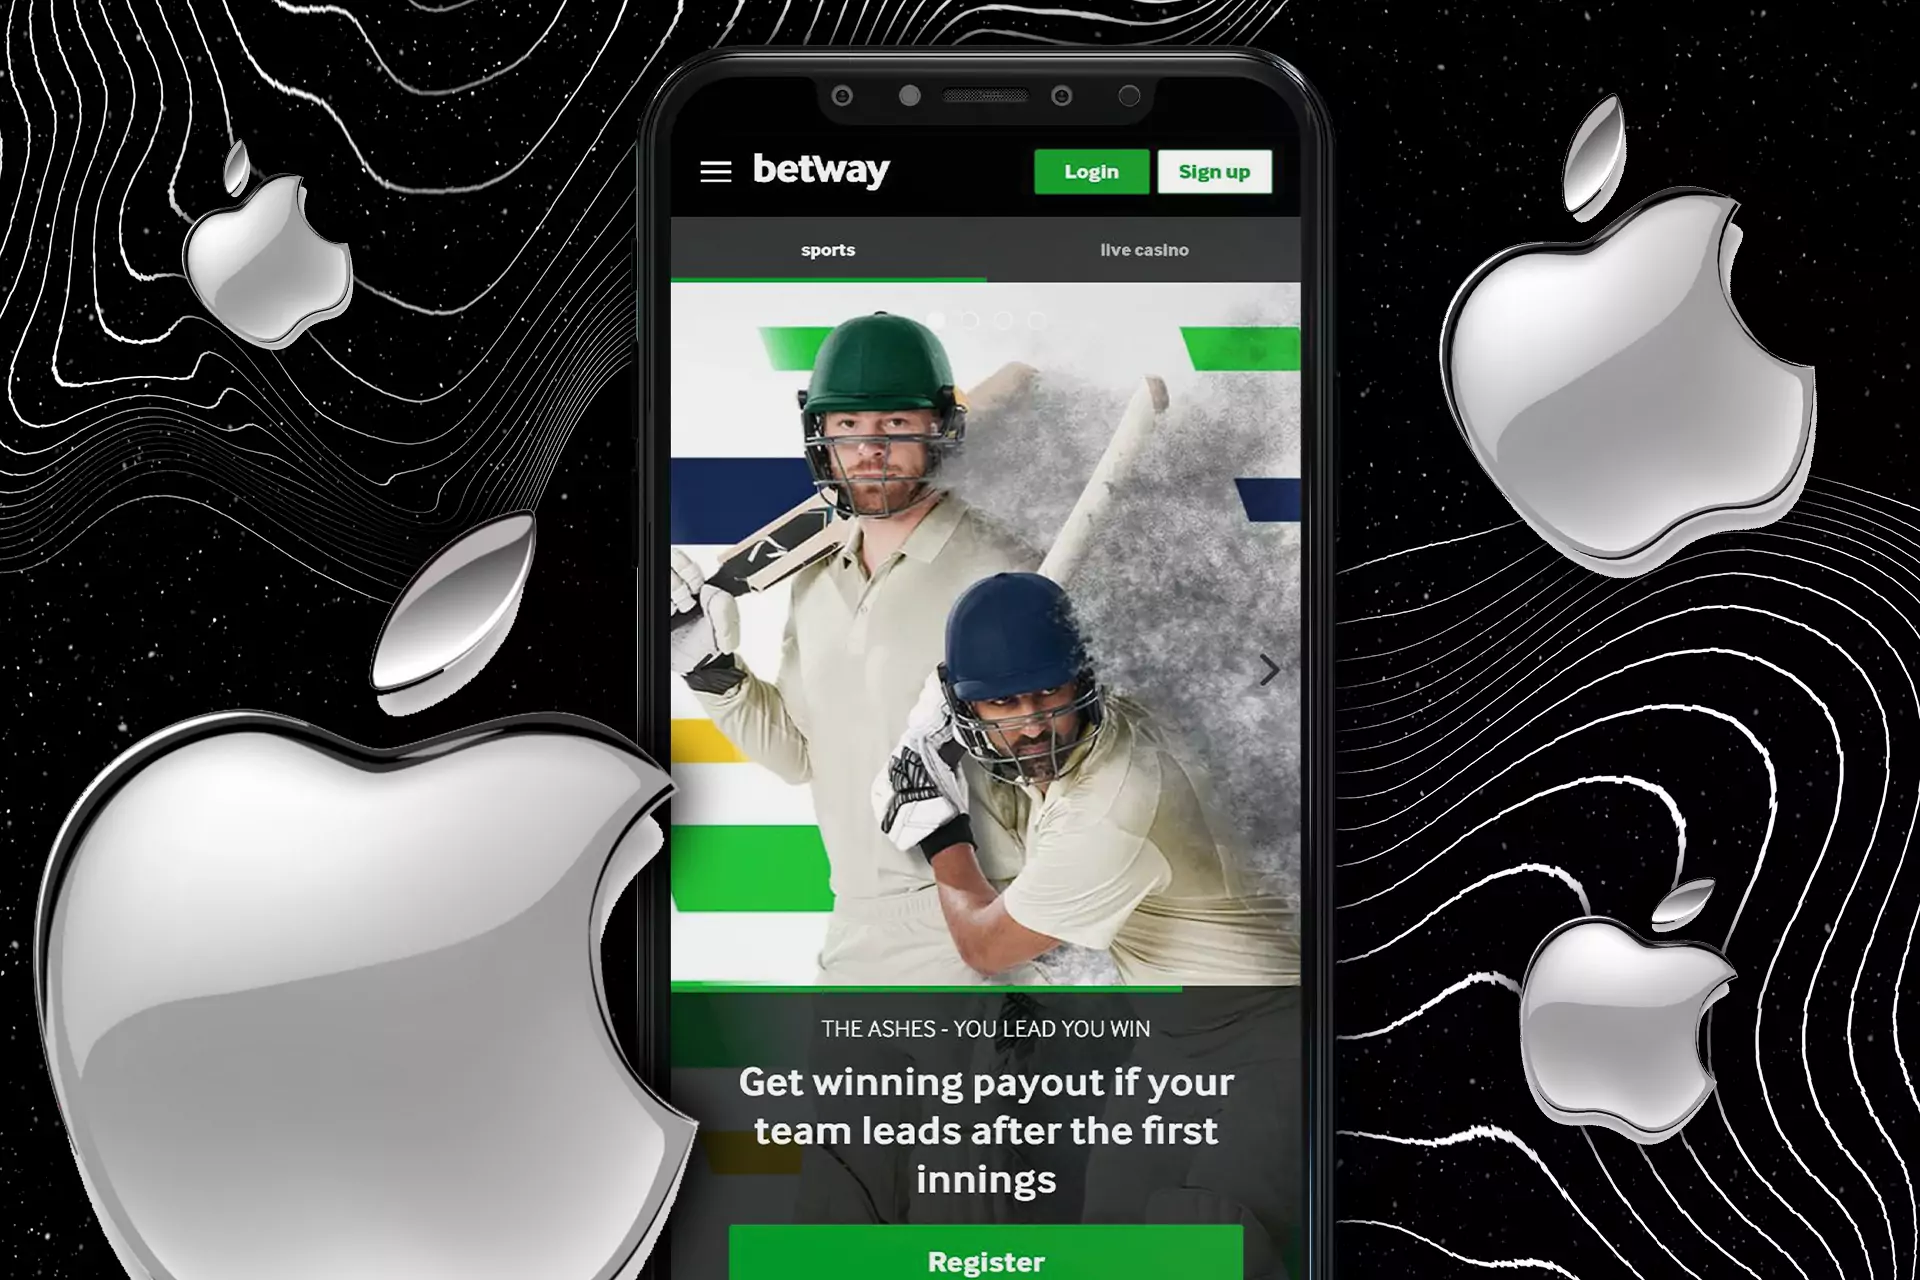 You can download the Betway app for free on iOS.